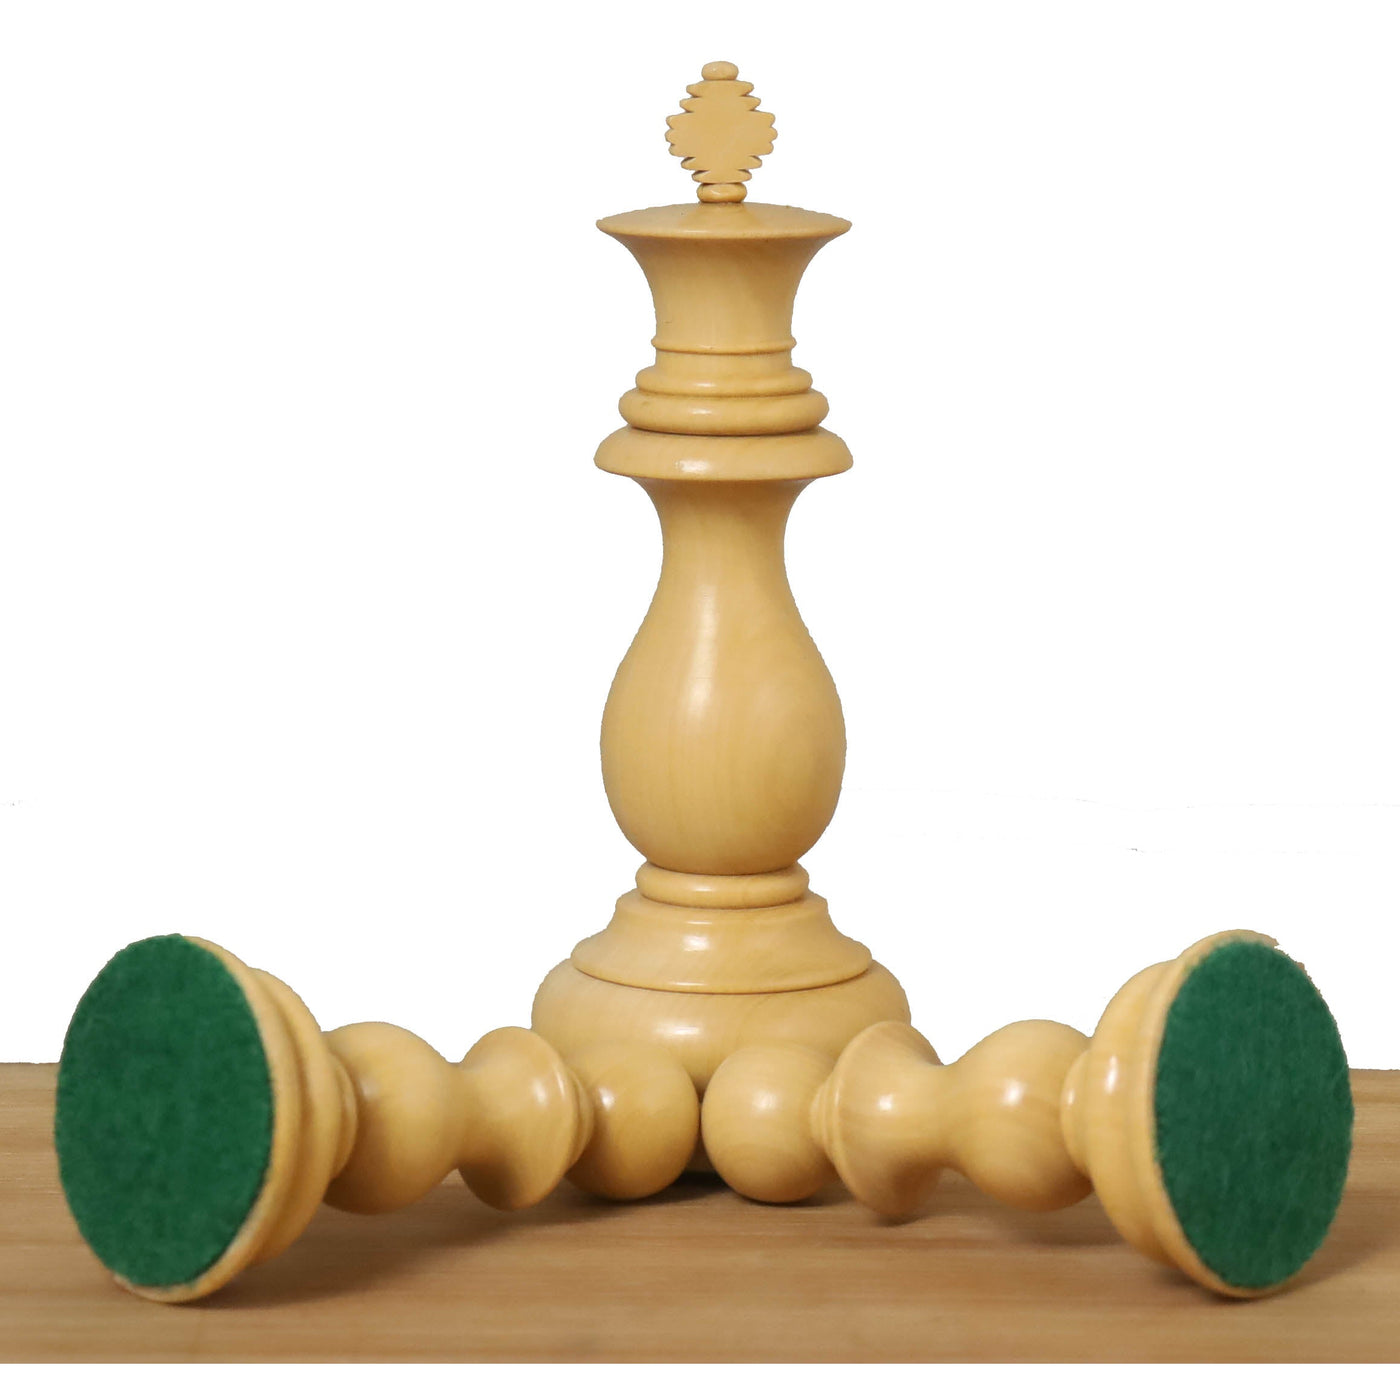 Slightly Imperfect 4.6" Medallion Luxury Staunton Chess Pieces Only Set